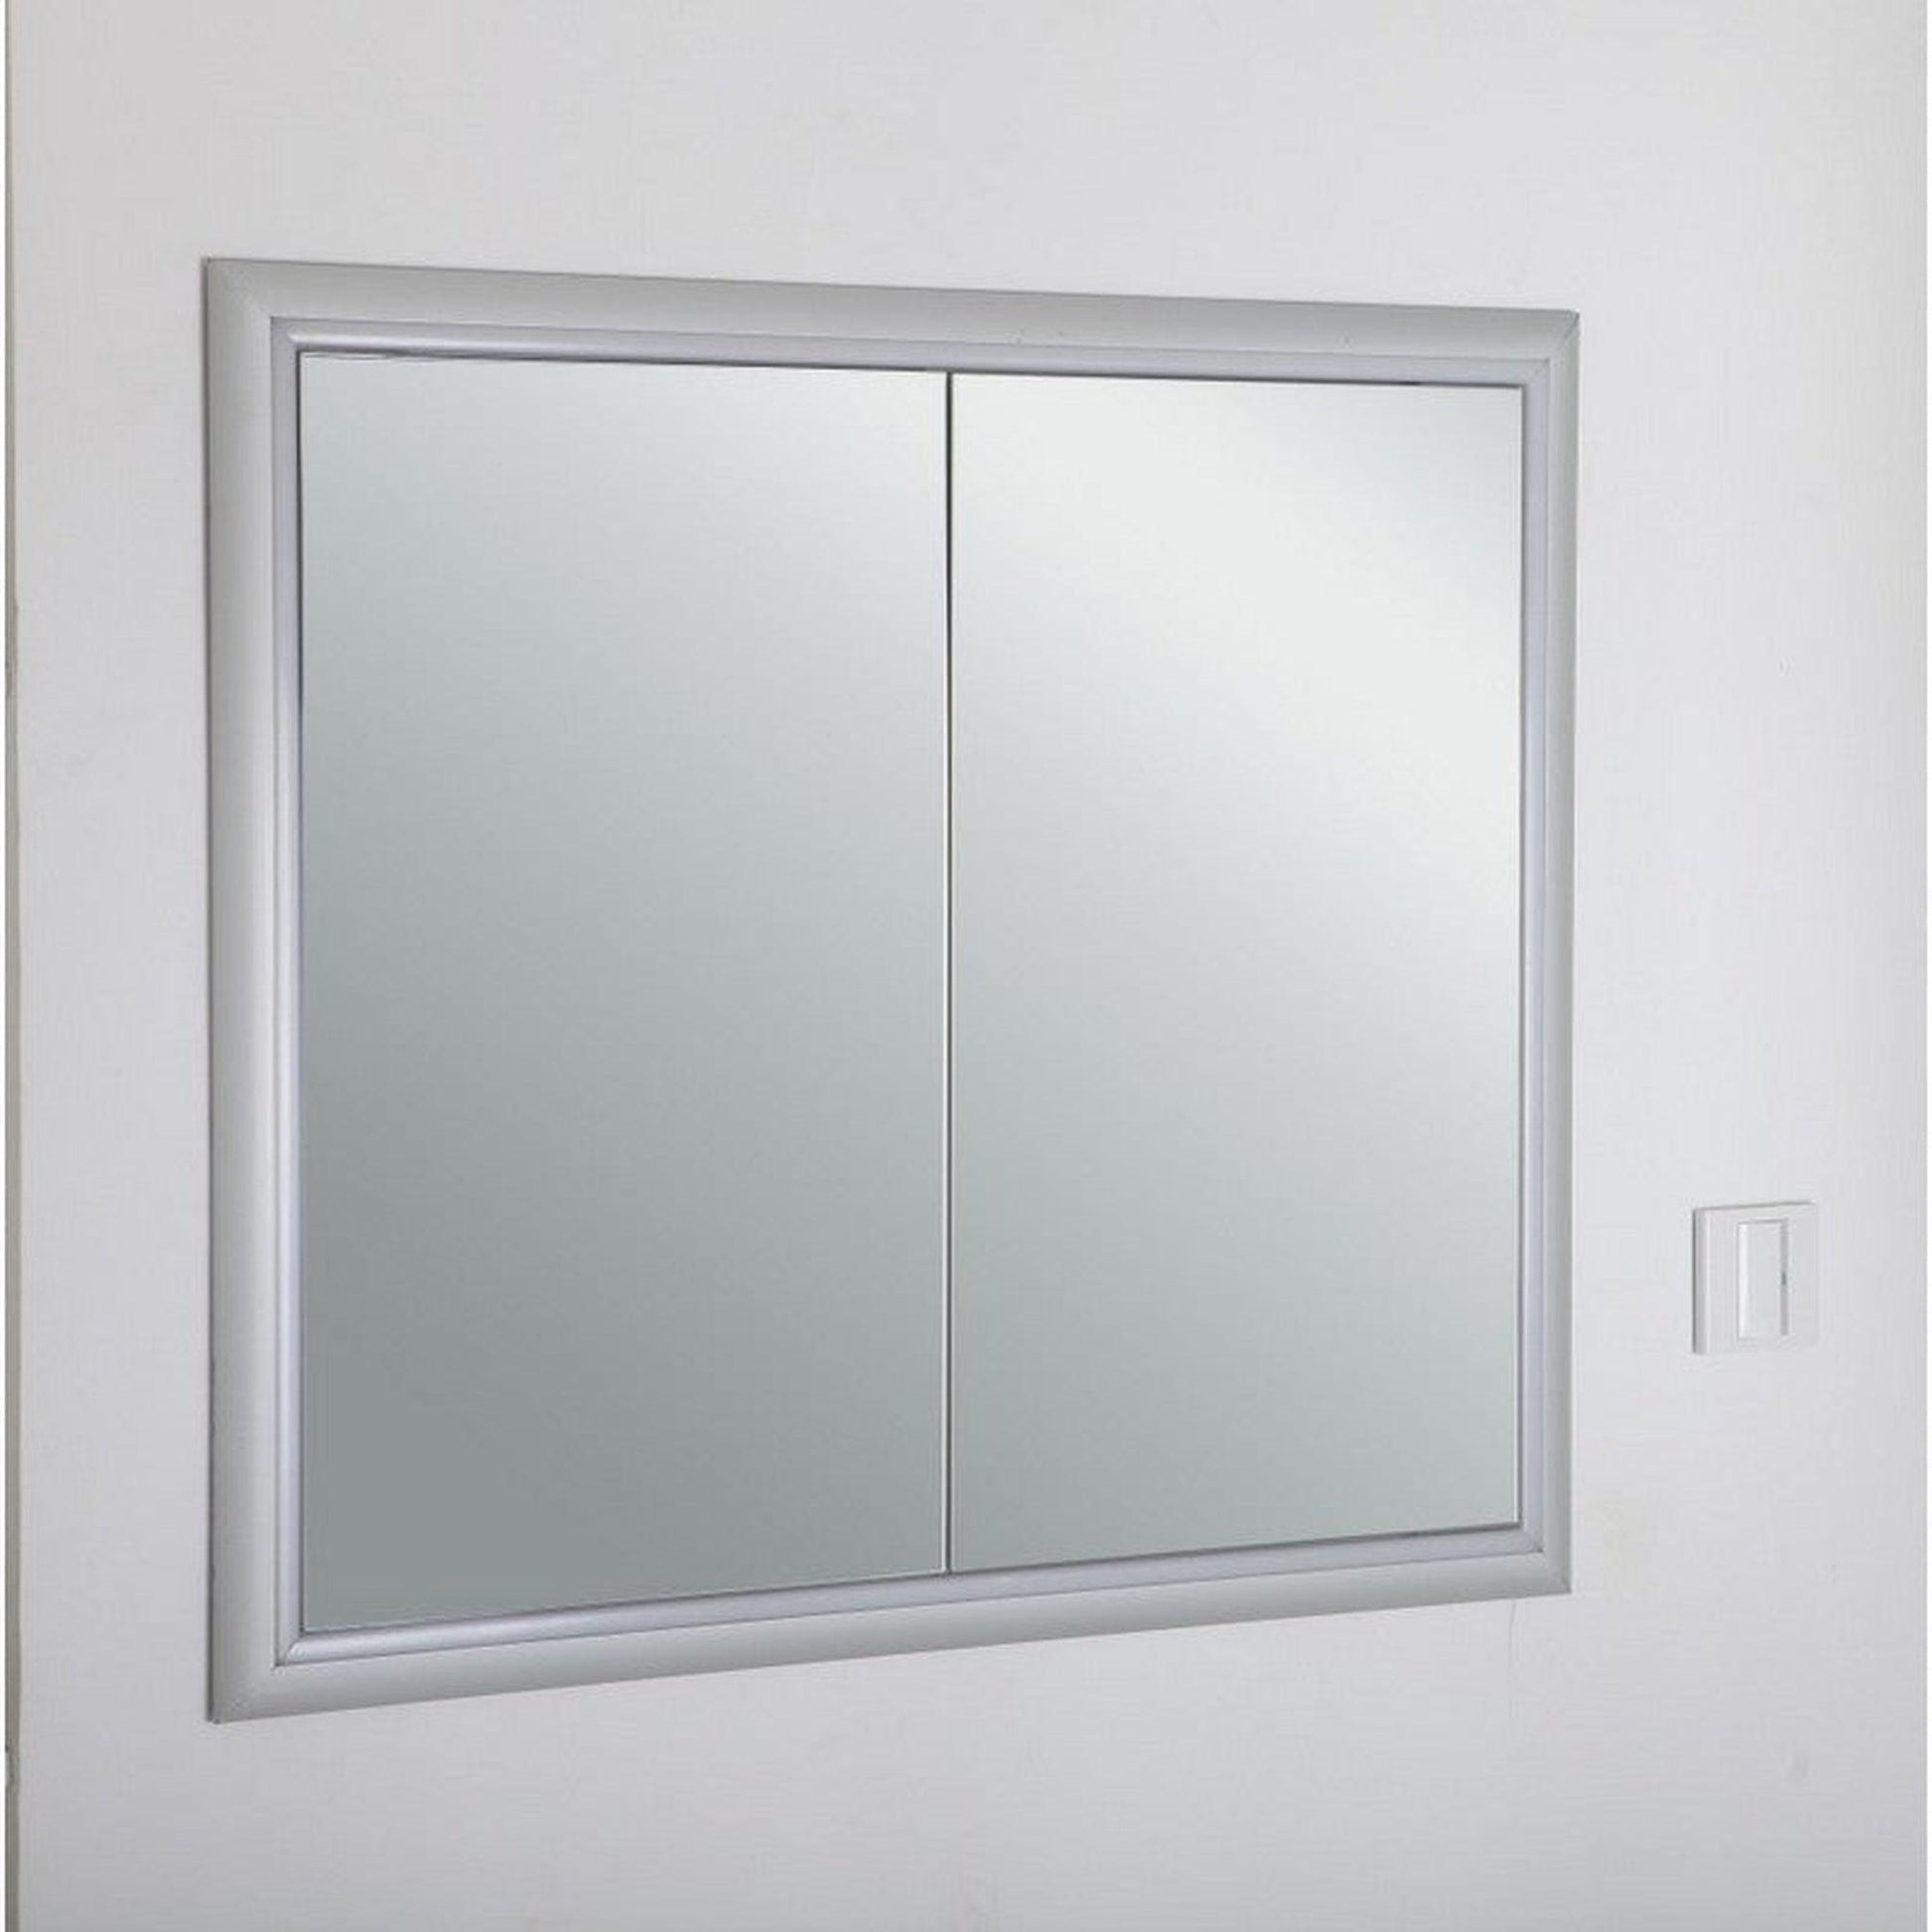 Eviva 33” x 30” Wall-Mounted Mirror Medicine Cabinet With Led Lights